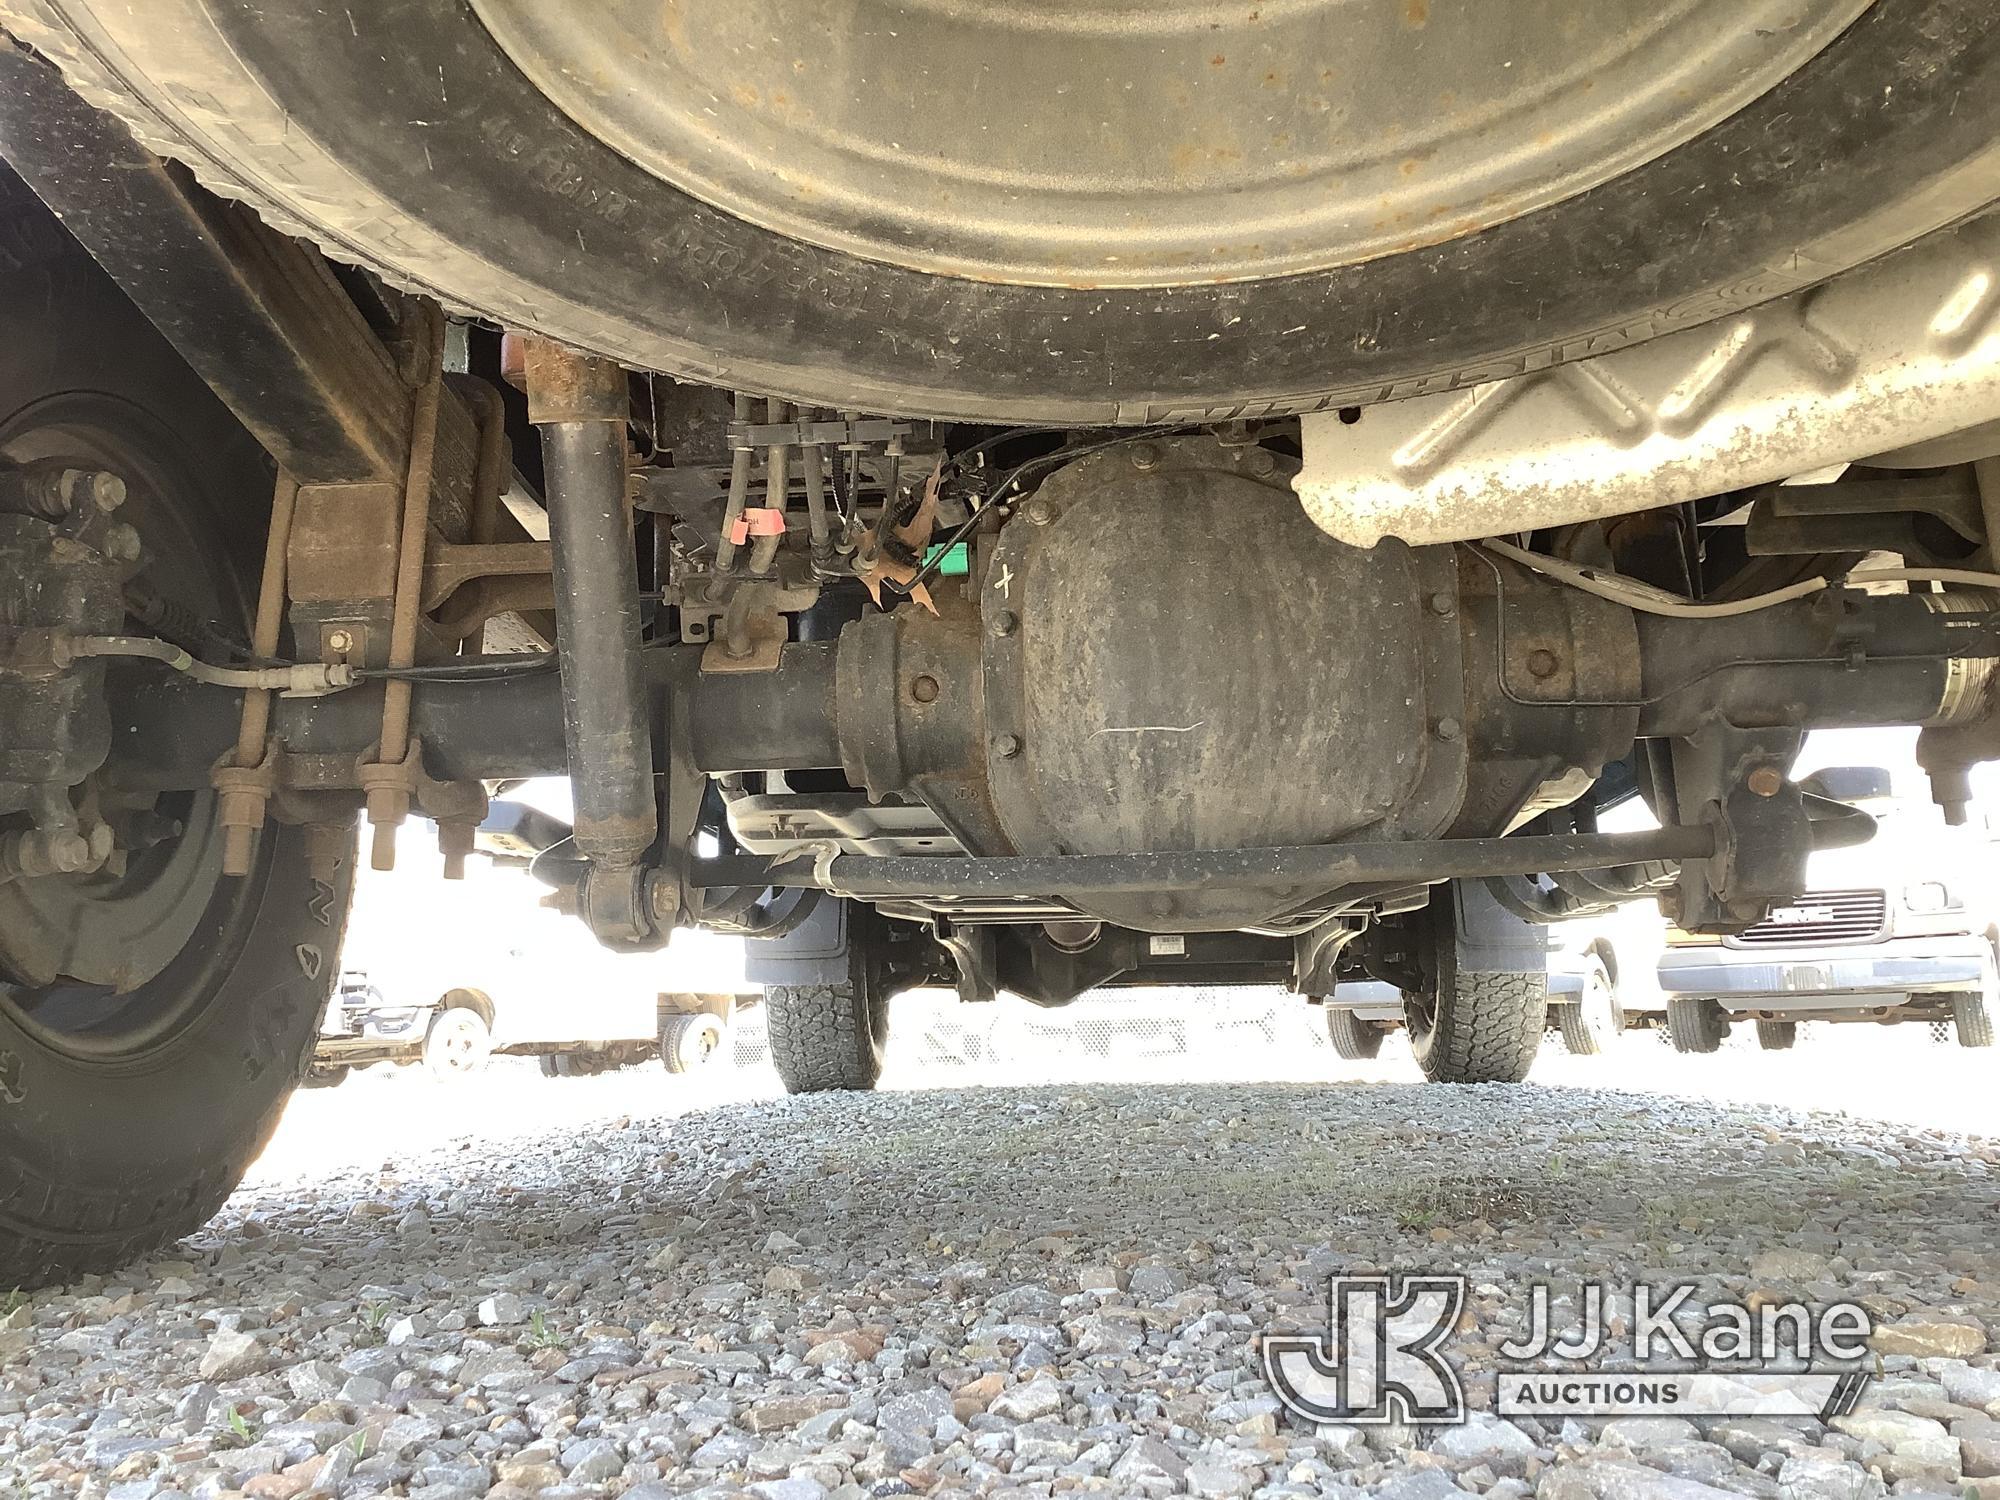 (Smock, PA) 2017 Ford F250 4x4 Extended-Cab Enclosed Service Truck Runs & Moves, TPS Light On, Rust